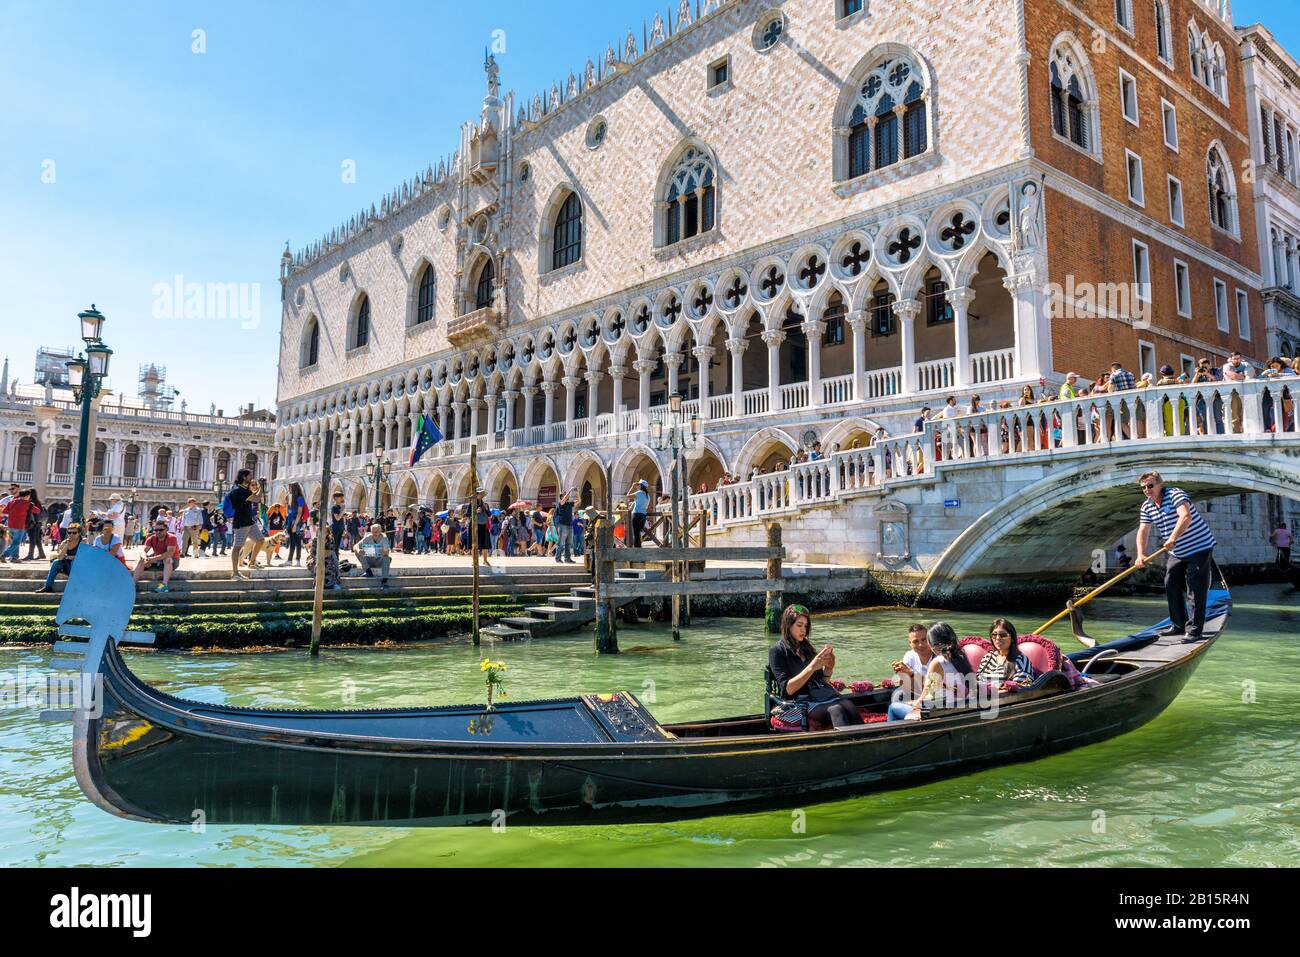 Venice, Italy - May 21, 2017: The gondola with tourists floats near the famous Doge`s Palace (Palazzo Ducale) in the St Mark`s Square. Doge`s Palace i Stock Photo